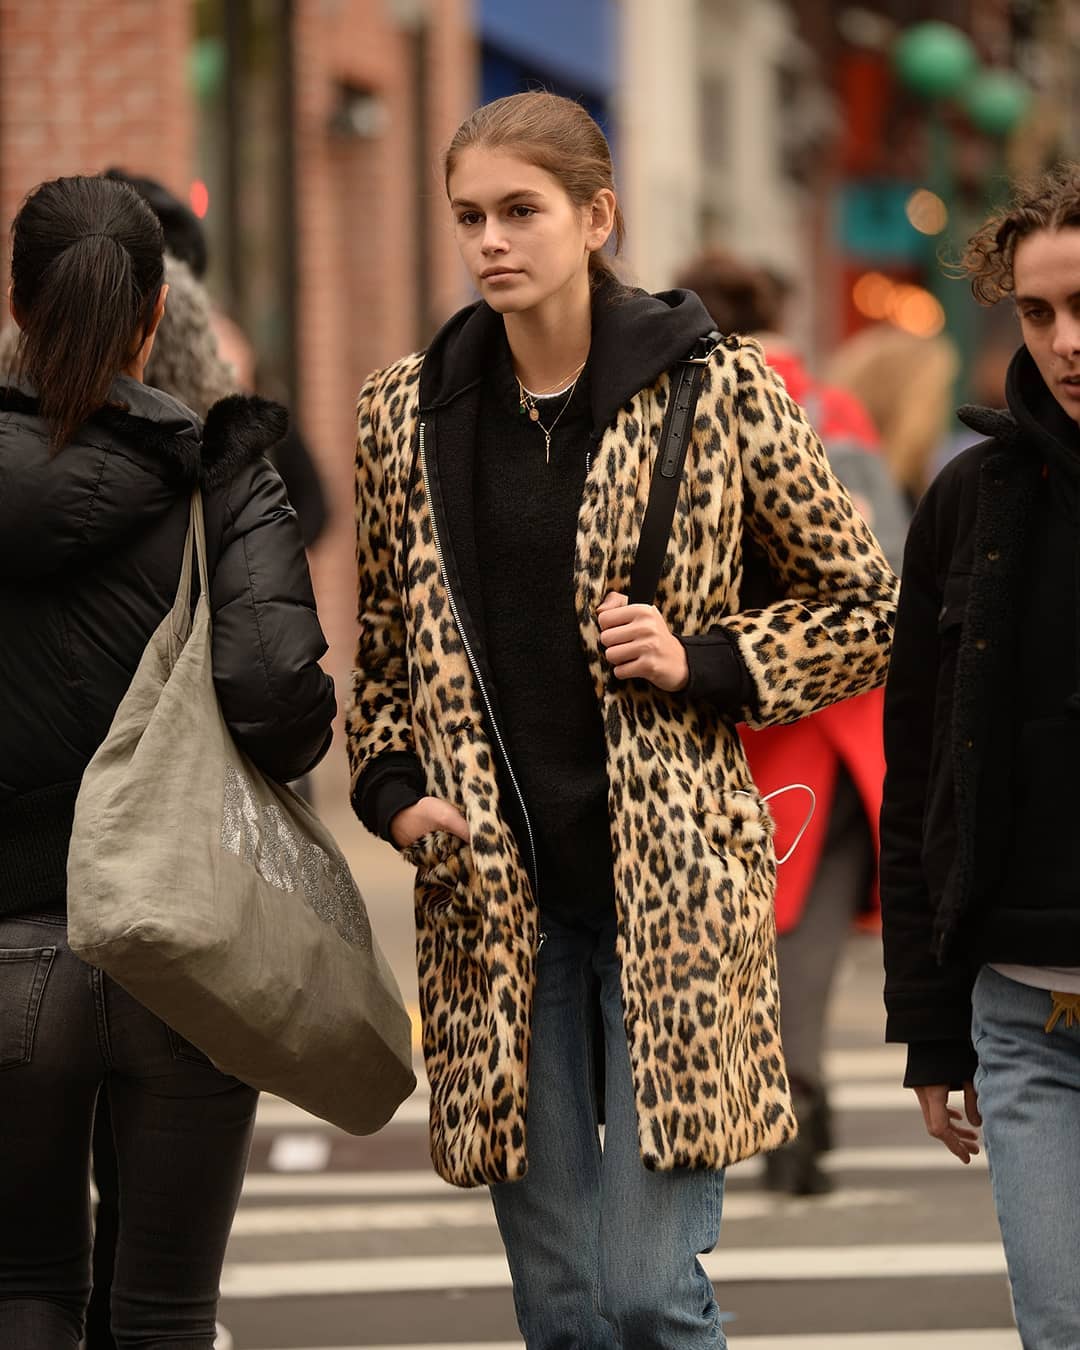 Kaia Gerber?s Leopard Coat is Everything